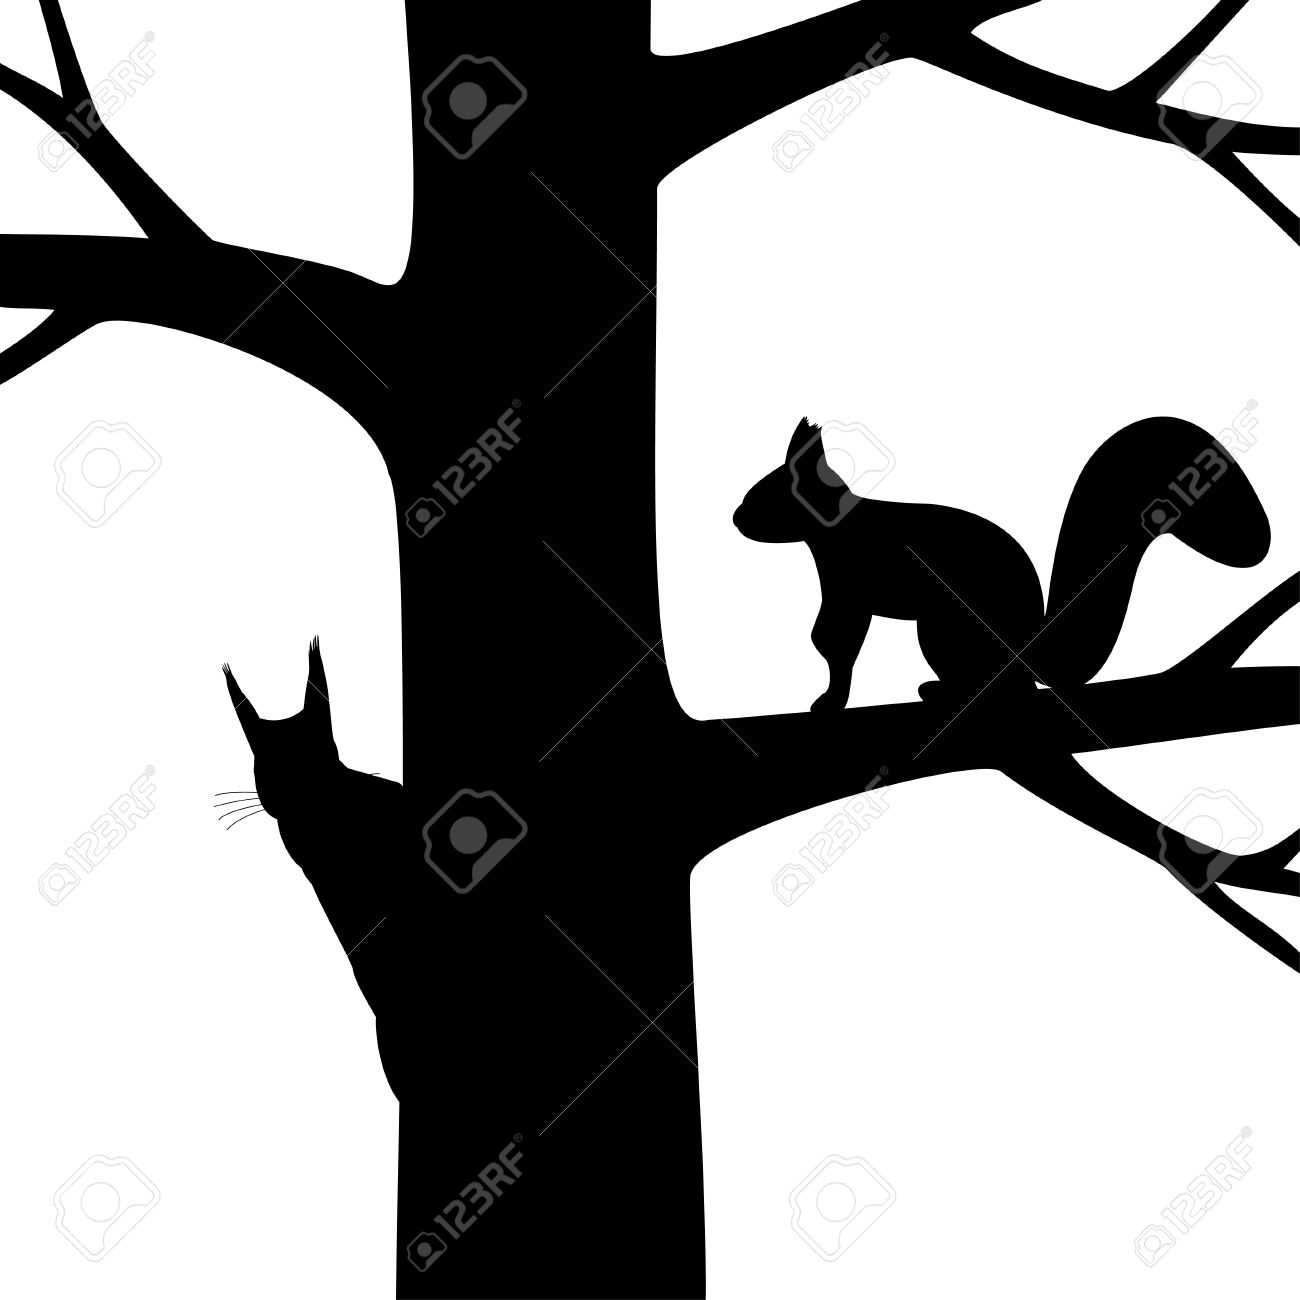 Illustration The Silhouette Two Squirrel On The Tree. Royalty Free.